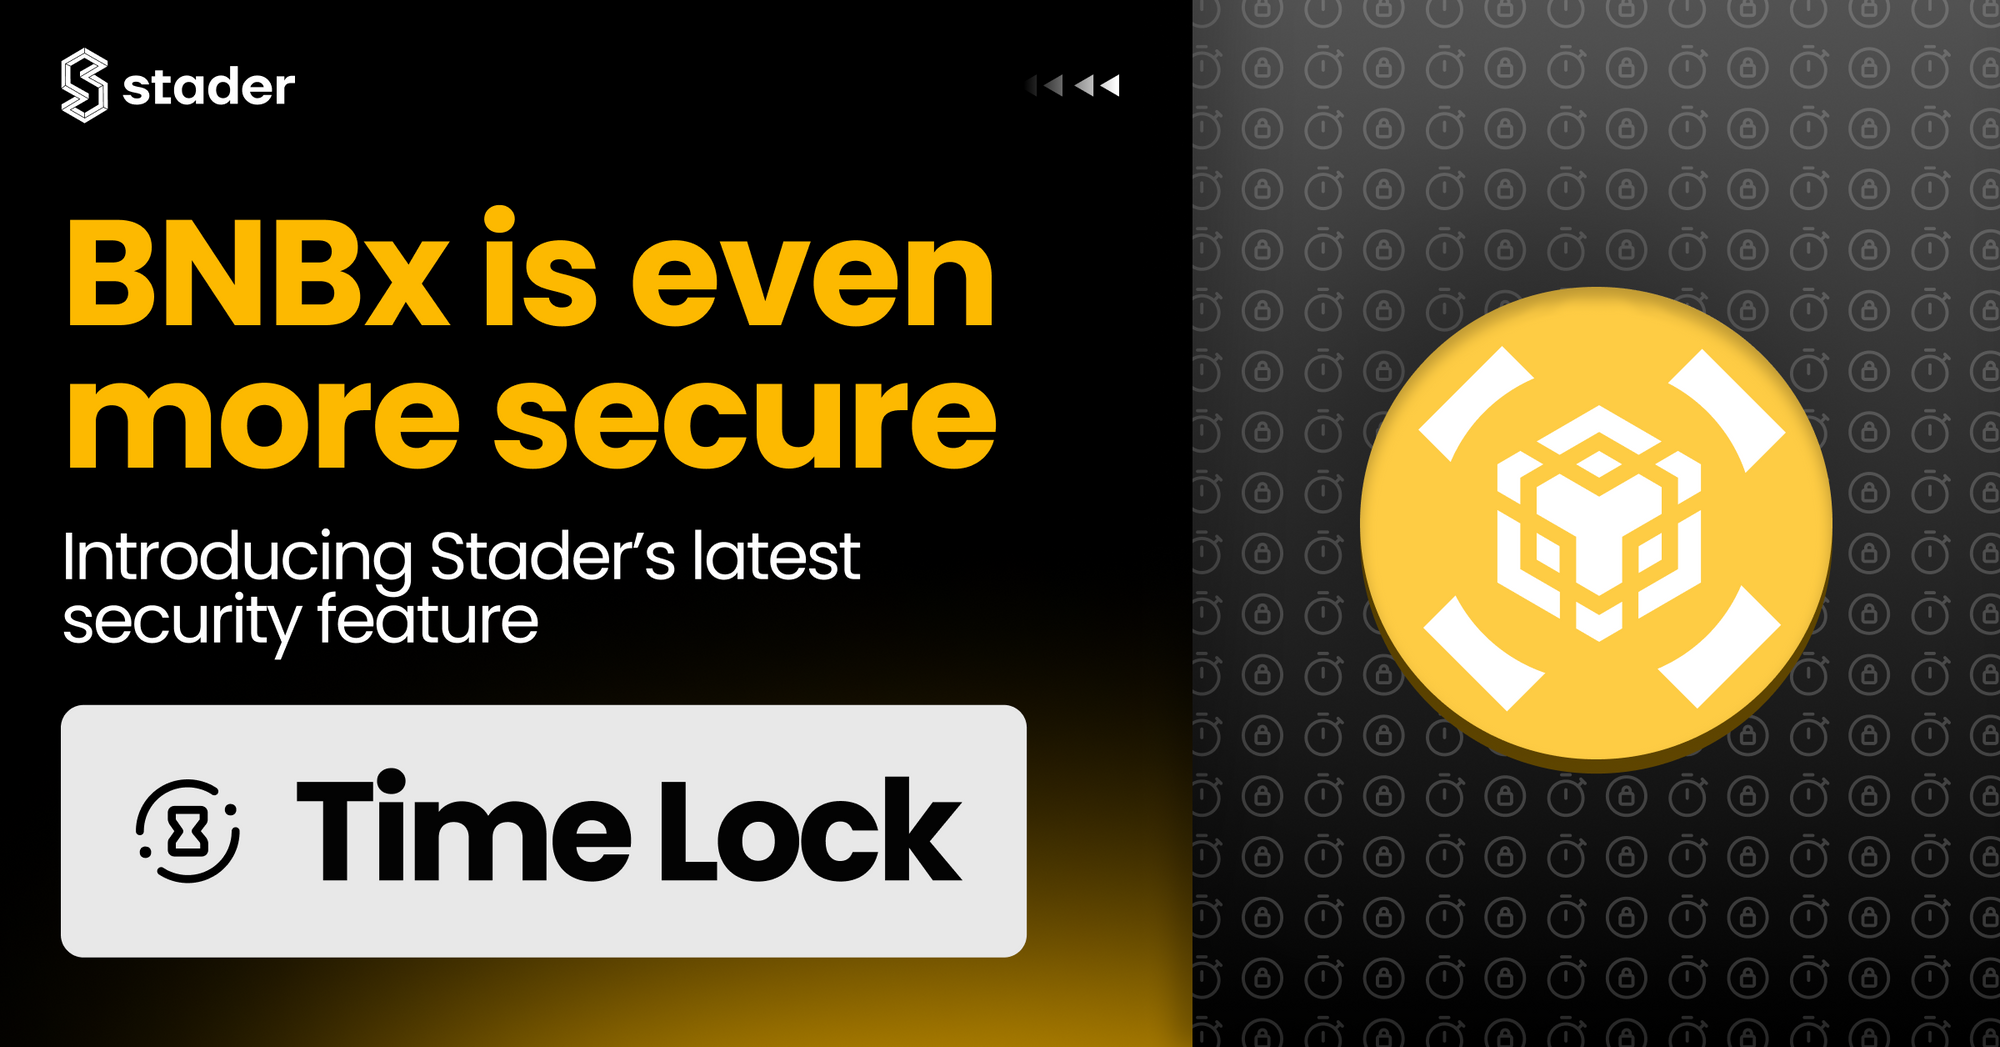 Introducing Time-Lock: Stader's latest security feature